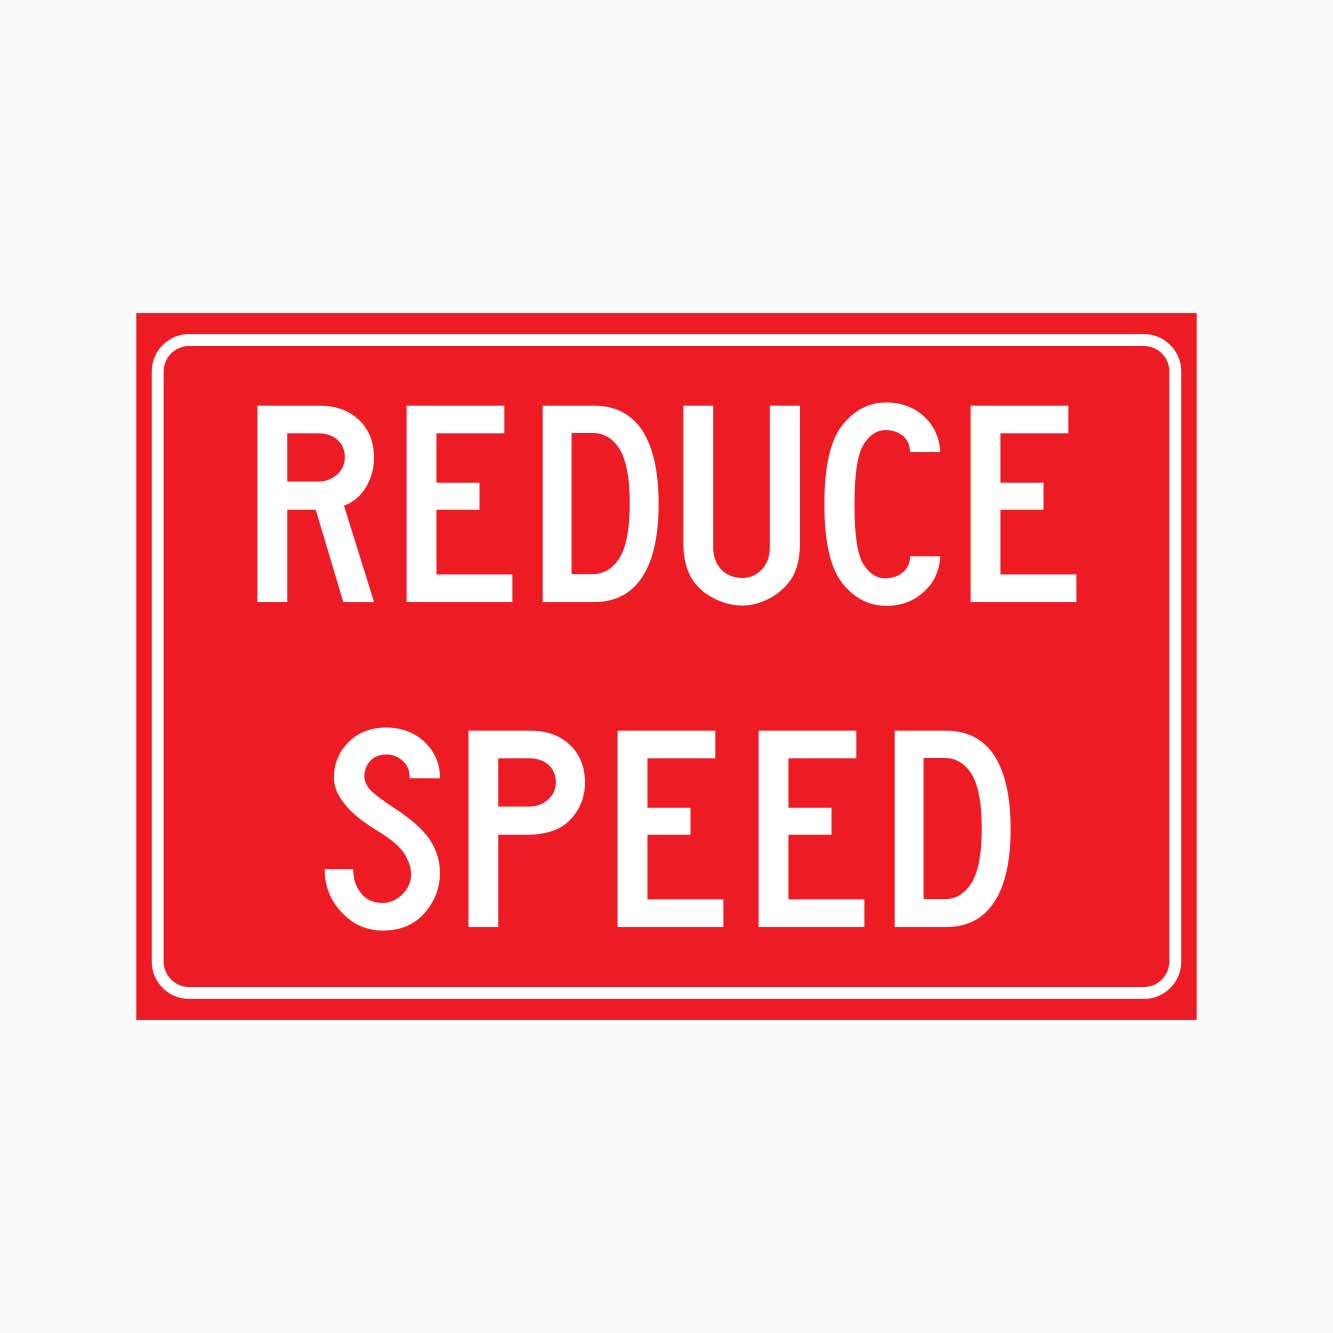 REDUCE SPEED SIGN - get signs